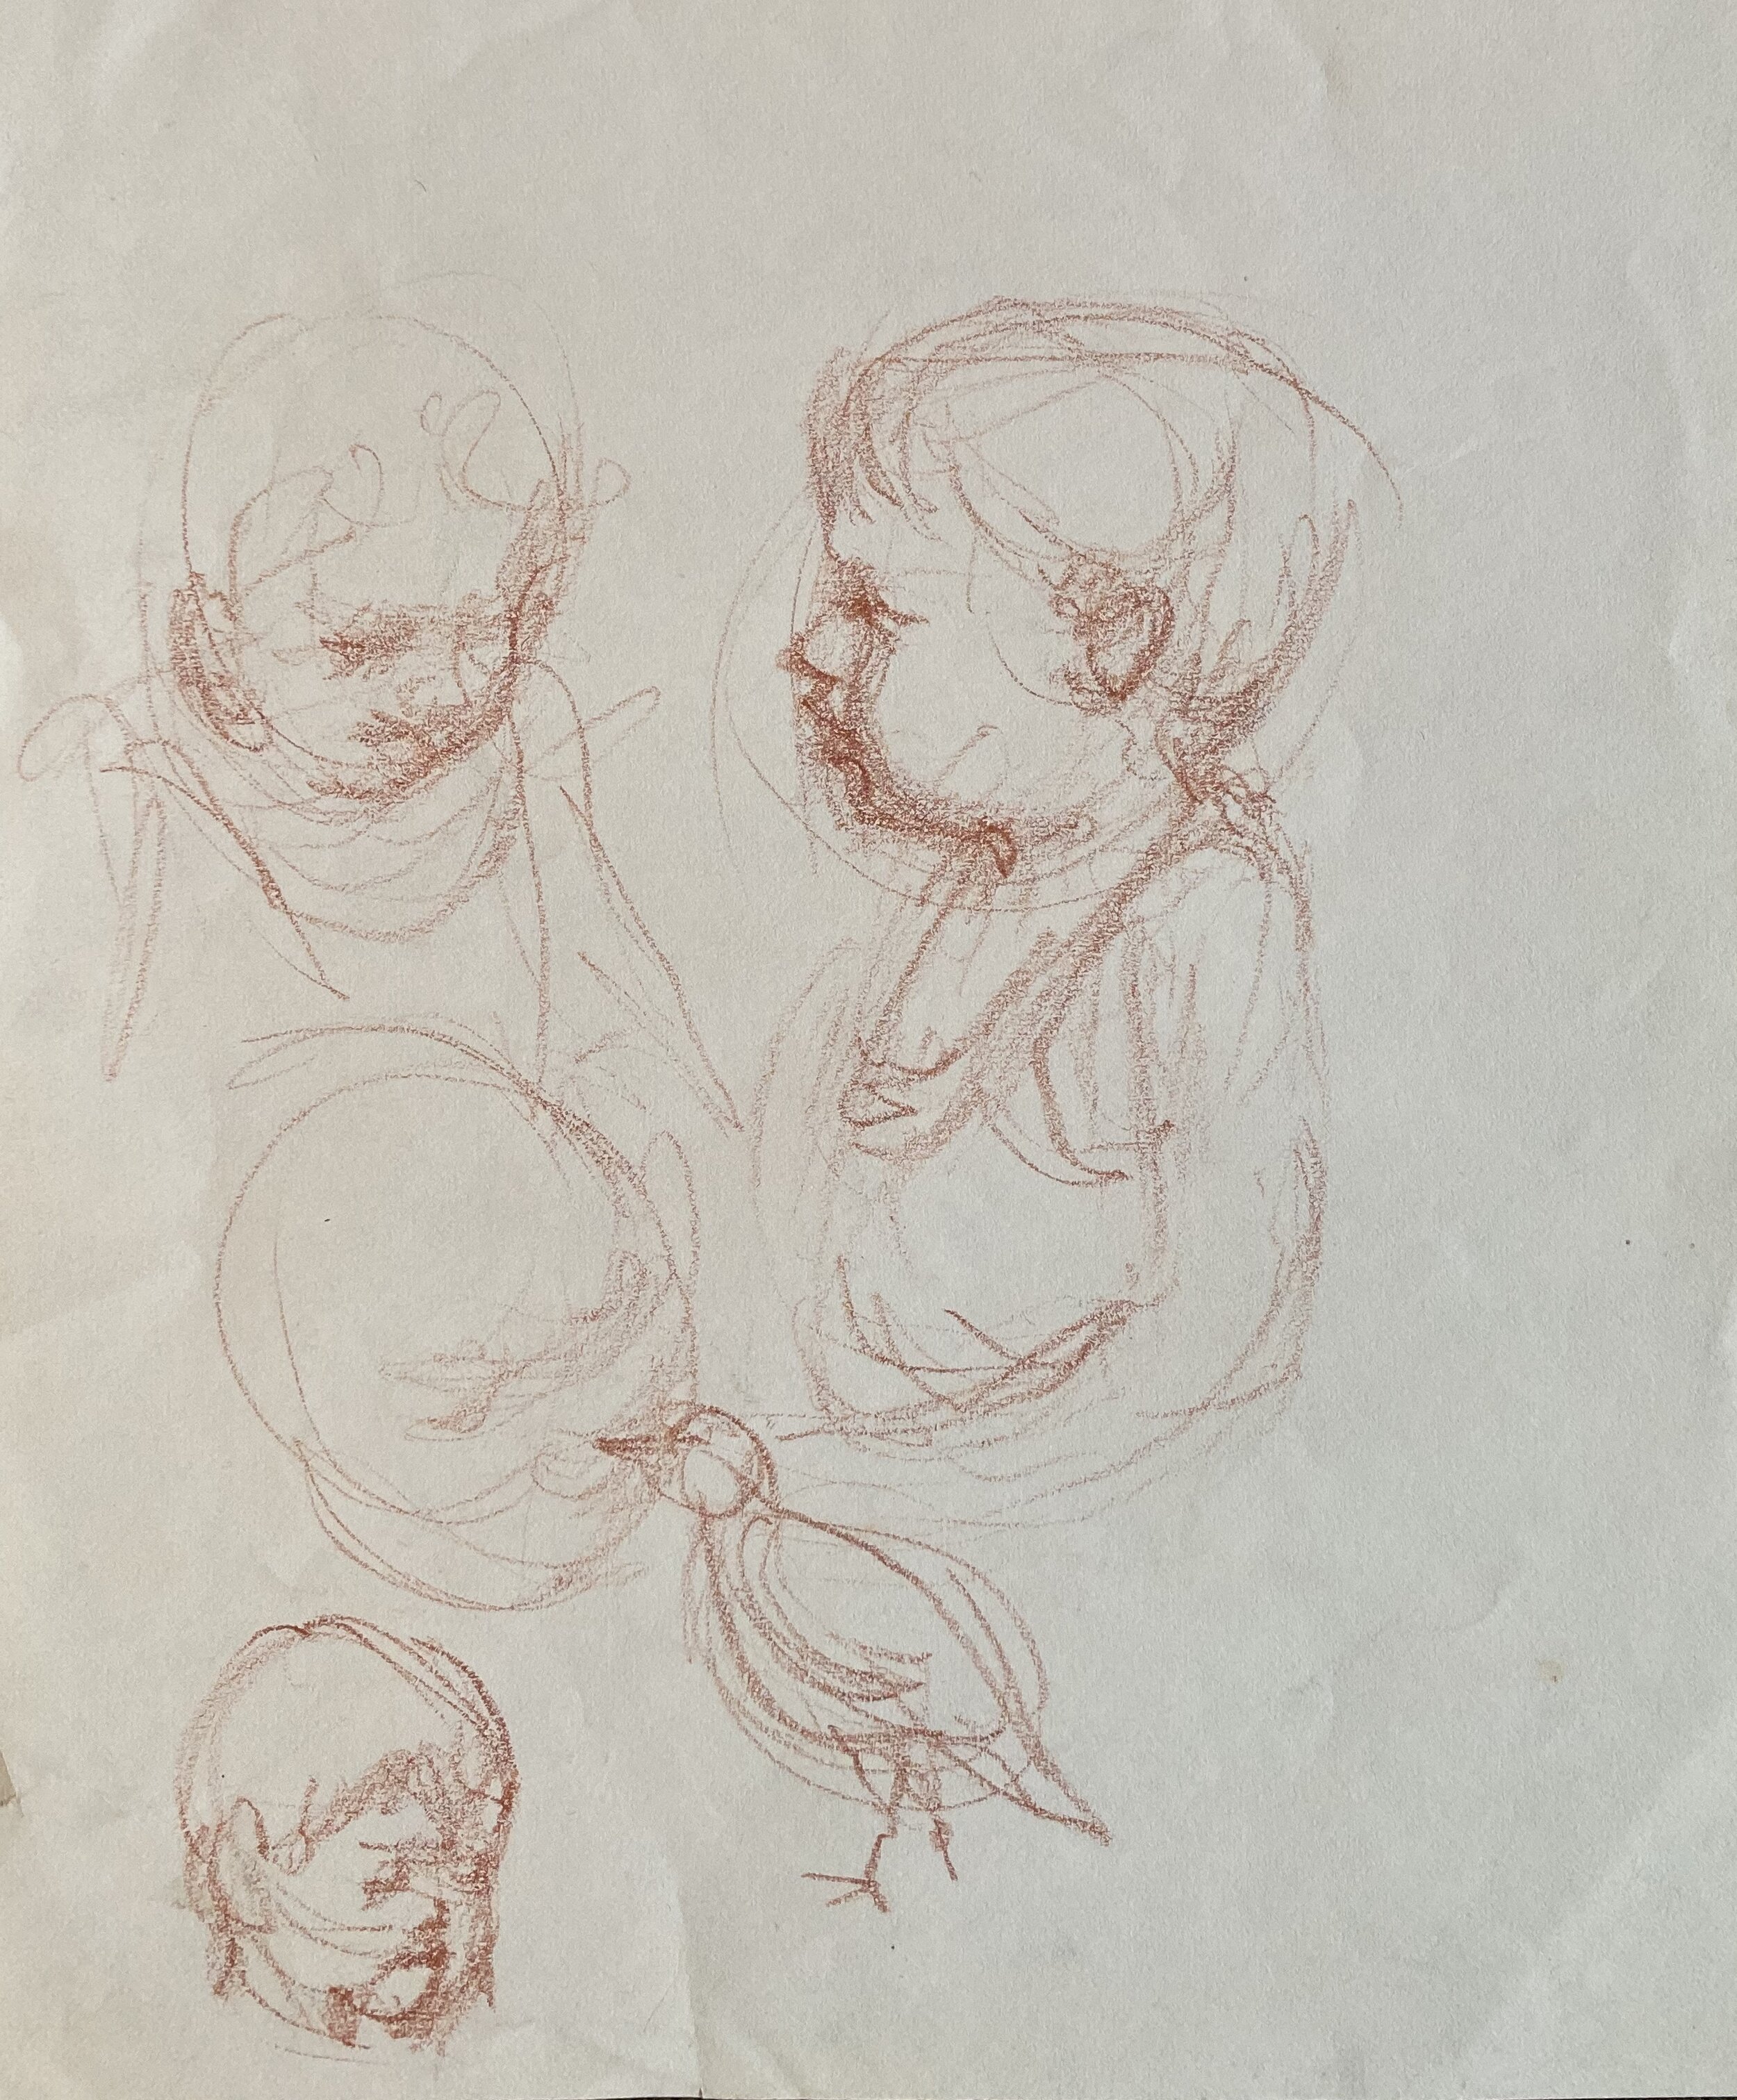   Description:  Sketches of children (unfinished)   Medium:  Pastel pencil on paper   Dimensions:   H: 12 in W: 9 in 